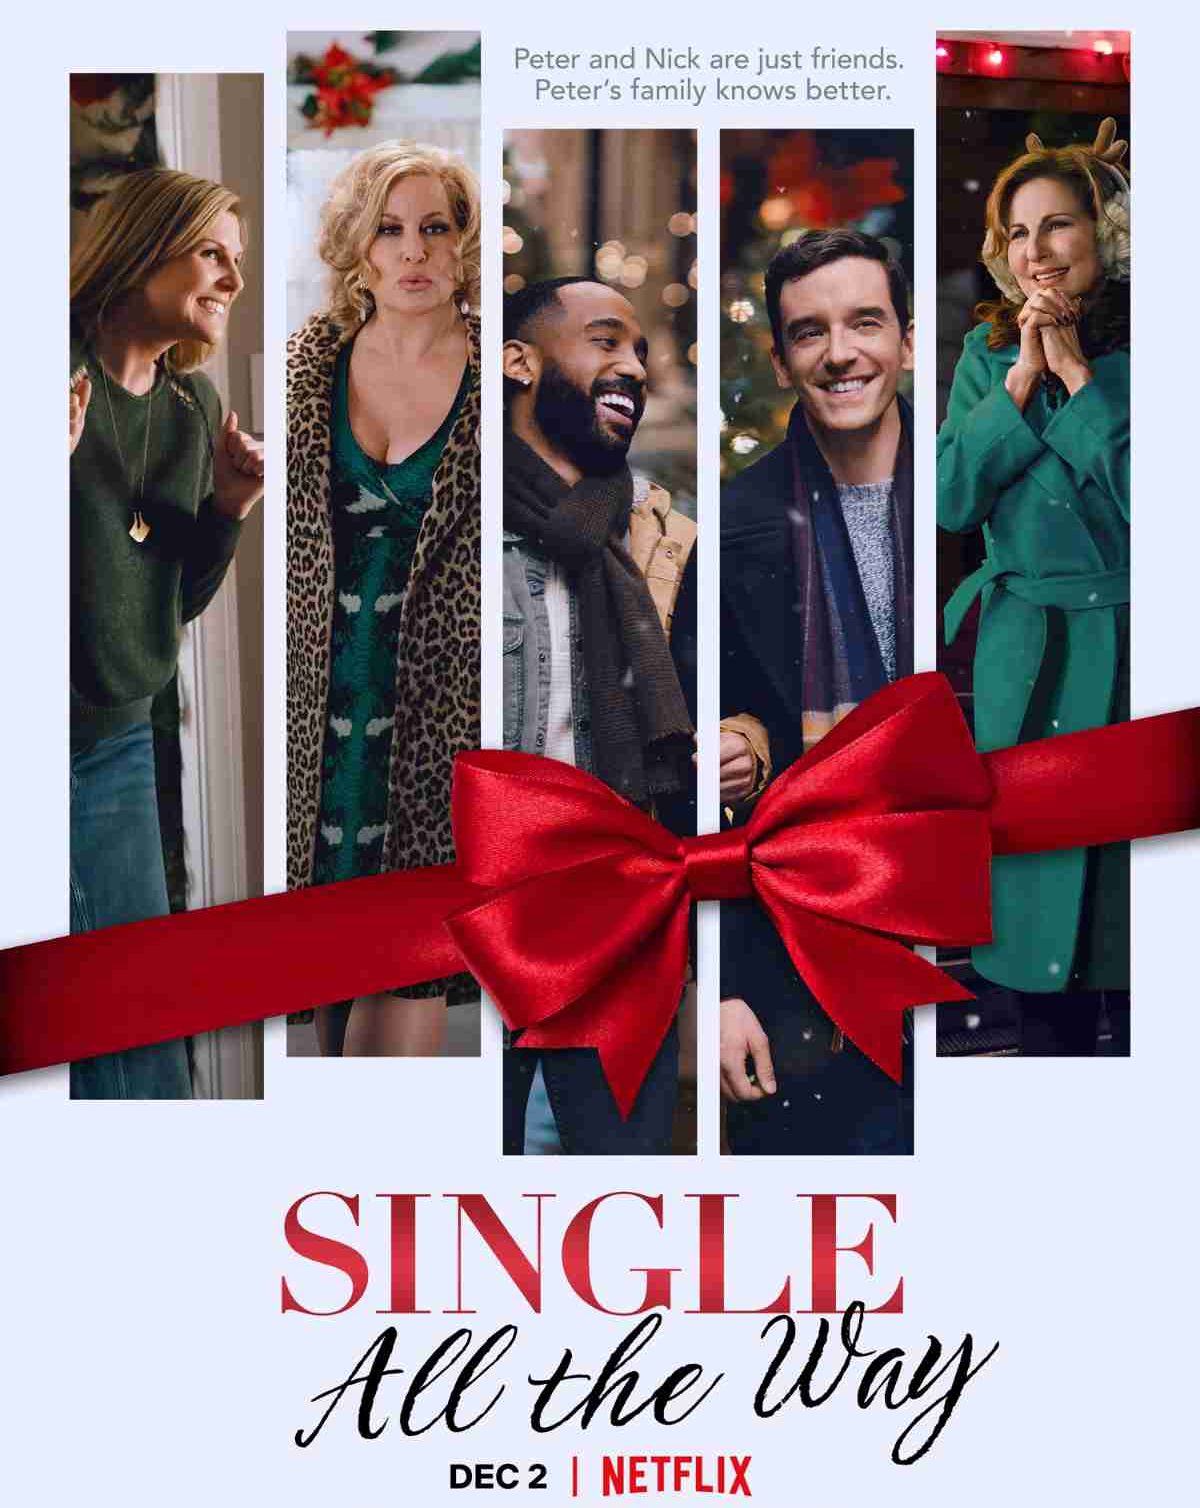 Is Single All The Way (2021) on Netflix